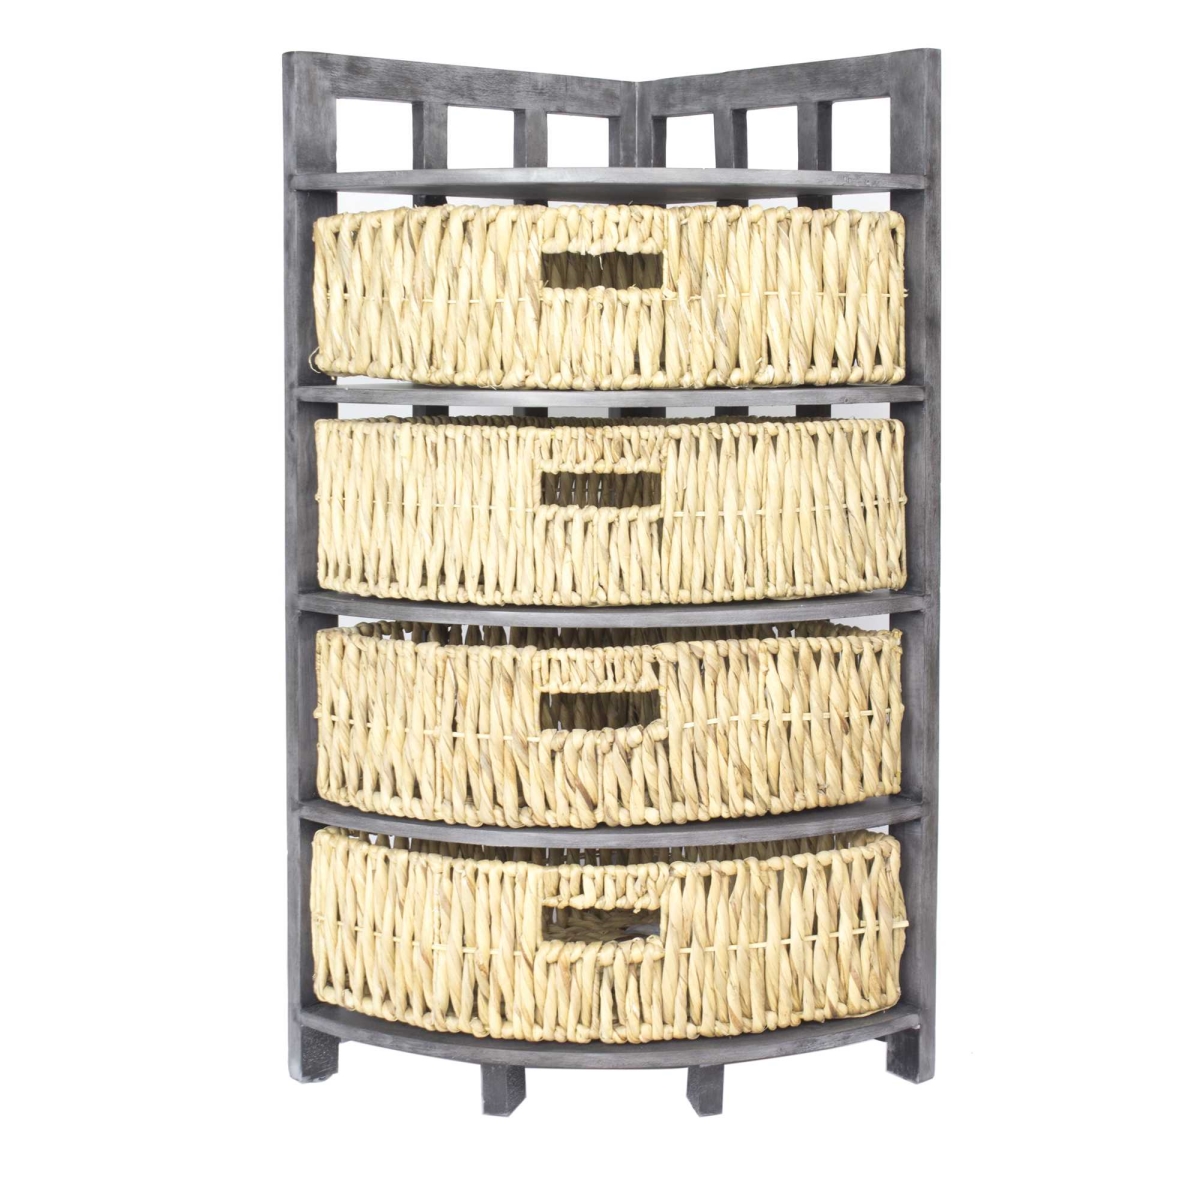 Home Roots Beddings 328683 Wood, Mdf & Water Hyacinth Storage Cabinet With 4 Baskets, Brown - 34.25 In.